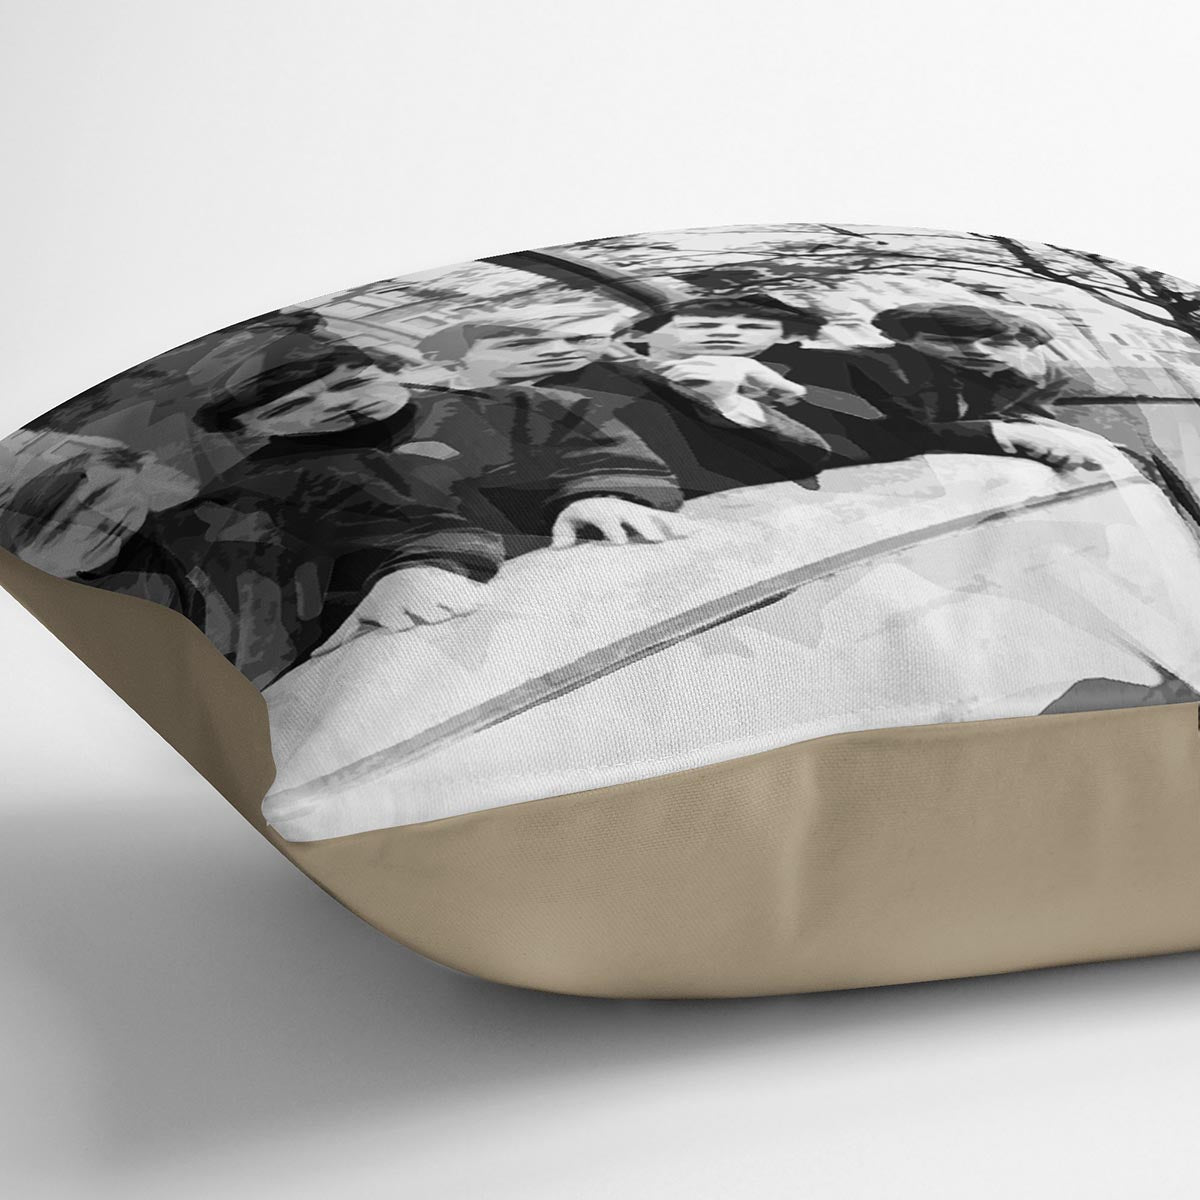 Rolling Stones early days Cushion